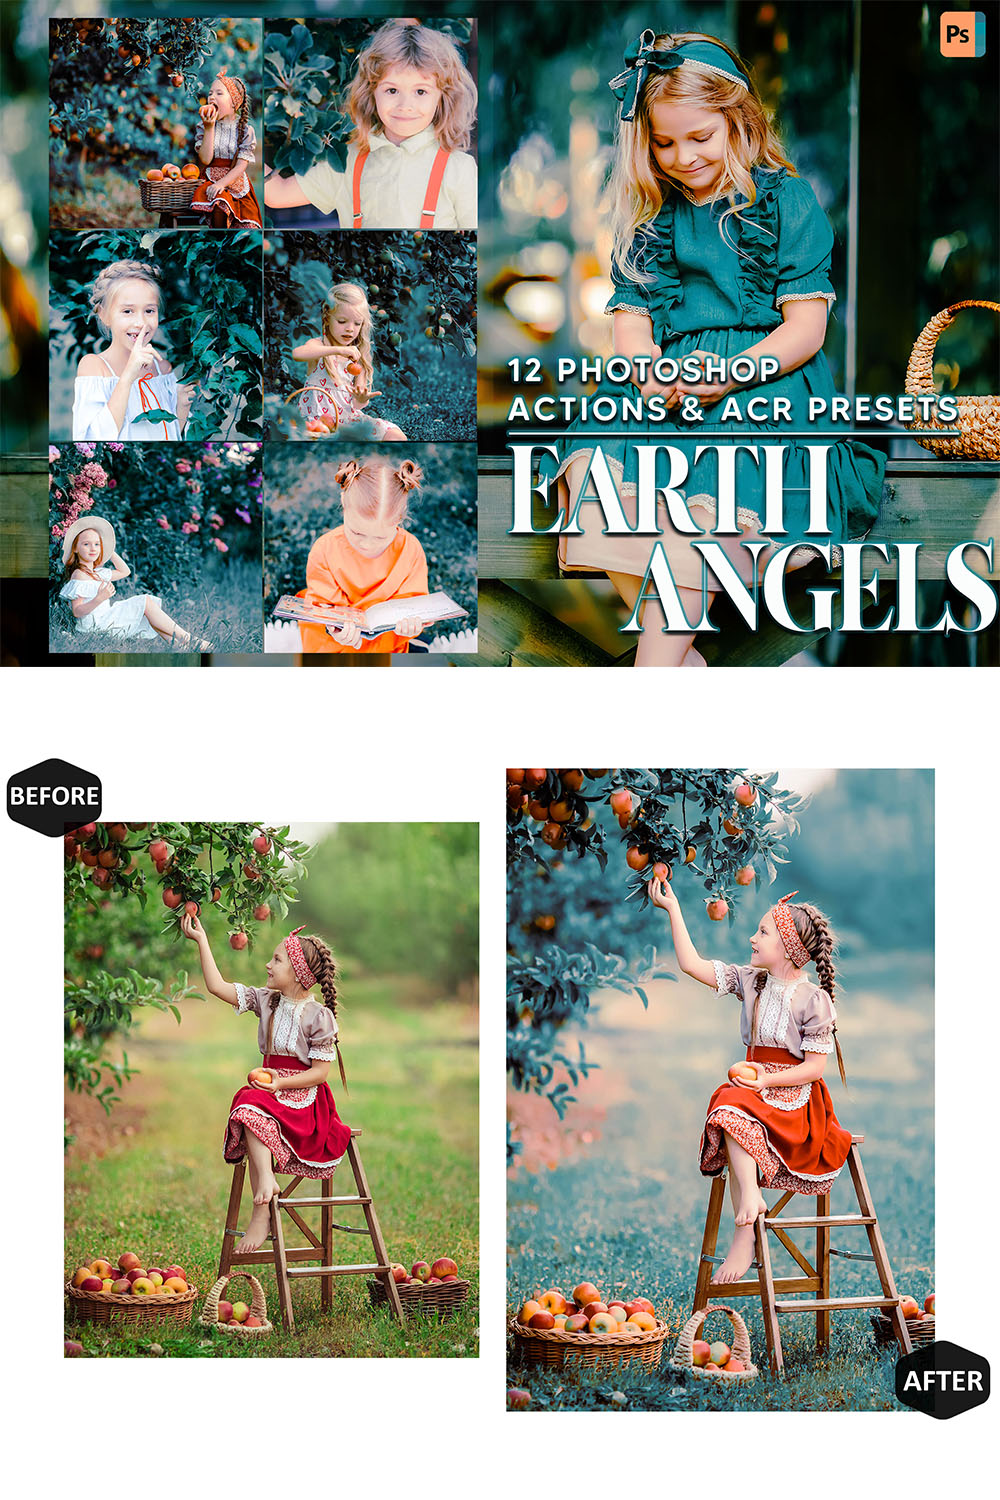 12 Photoshop Actions, Earth Angels Ps Action, Children ACR Preset, Bluish Ps Filter, Portrait And Lifestyle Theme For Instagram, Blogger pinterest preview image.